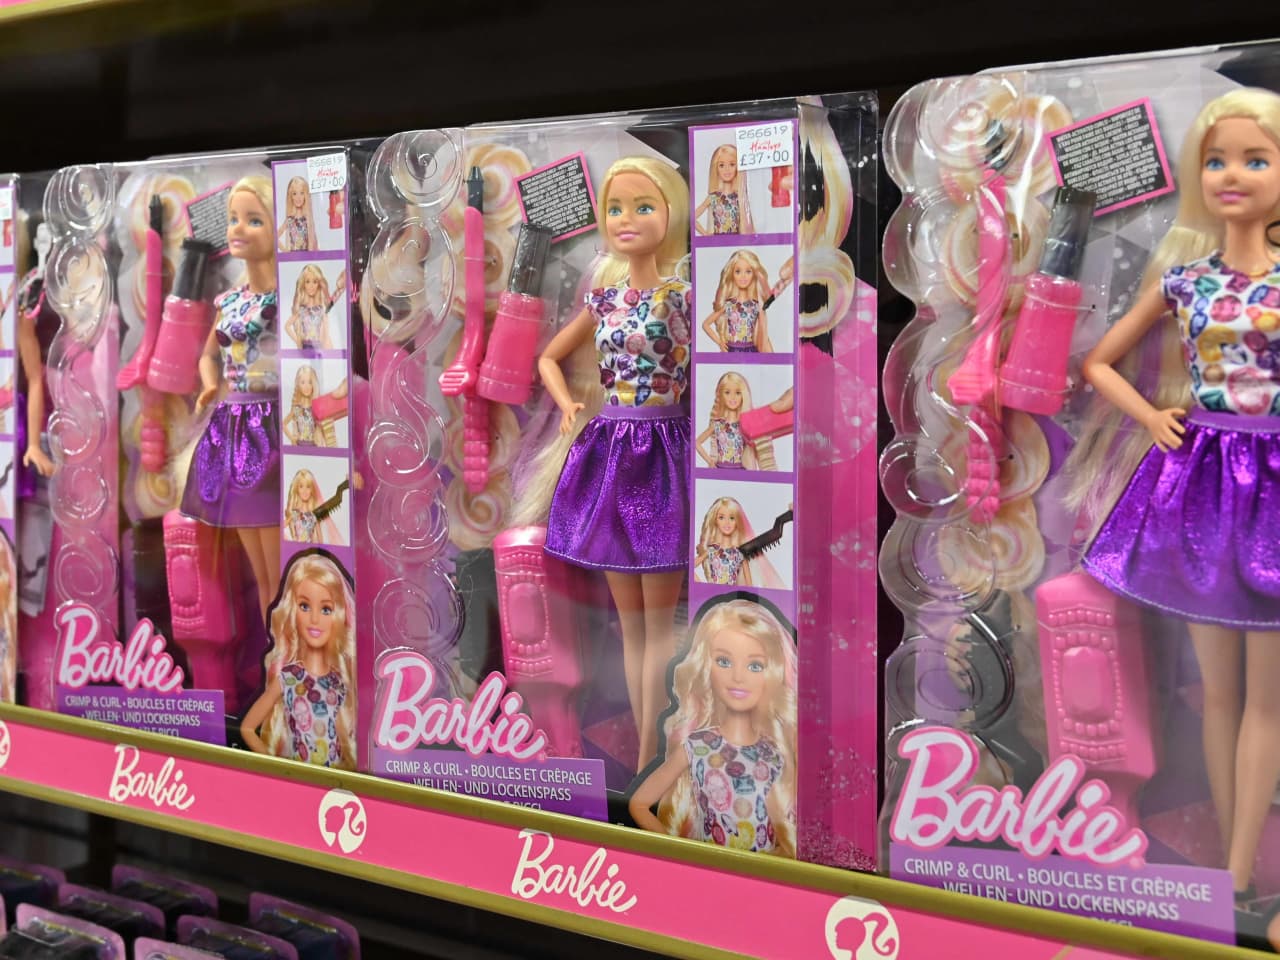 Barbie is all virgin plastic for now --- but Mattel's pledge for packaging and recycled toys means change is coming MarketWatch